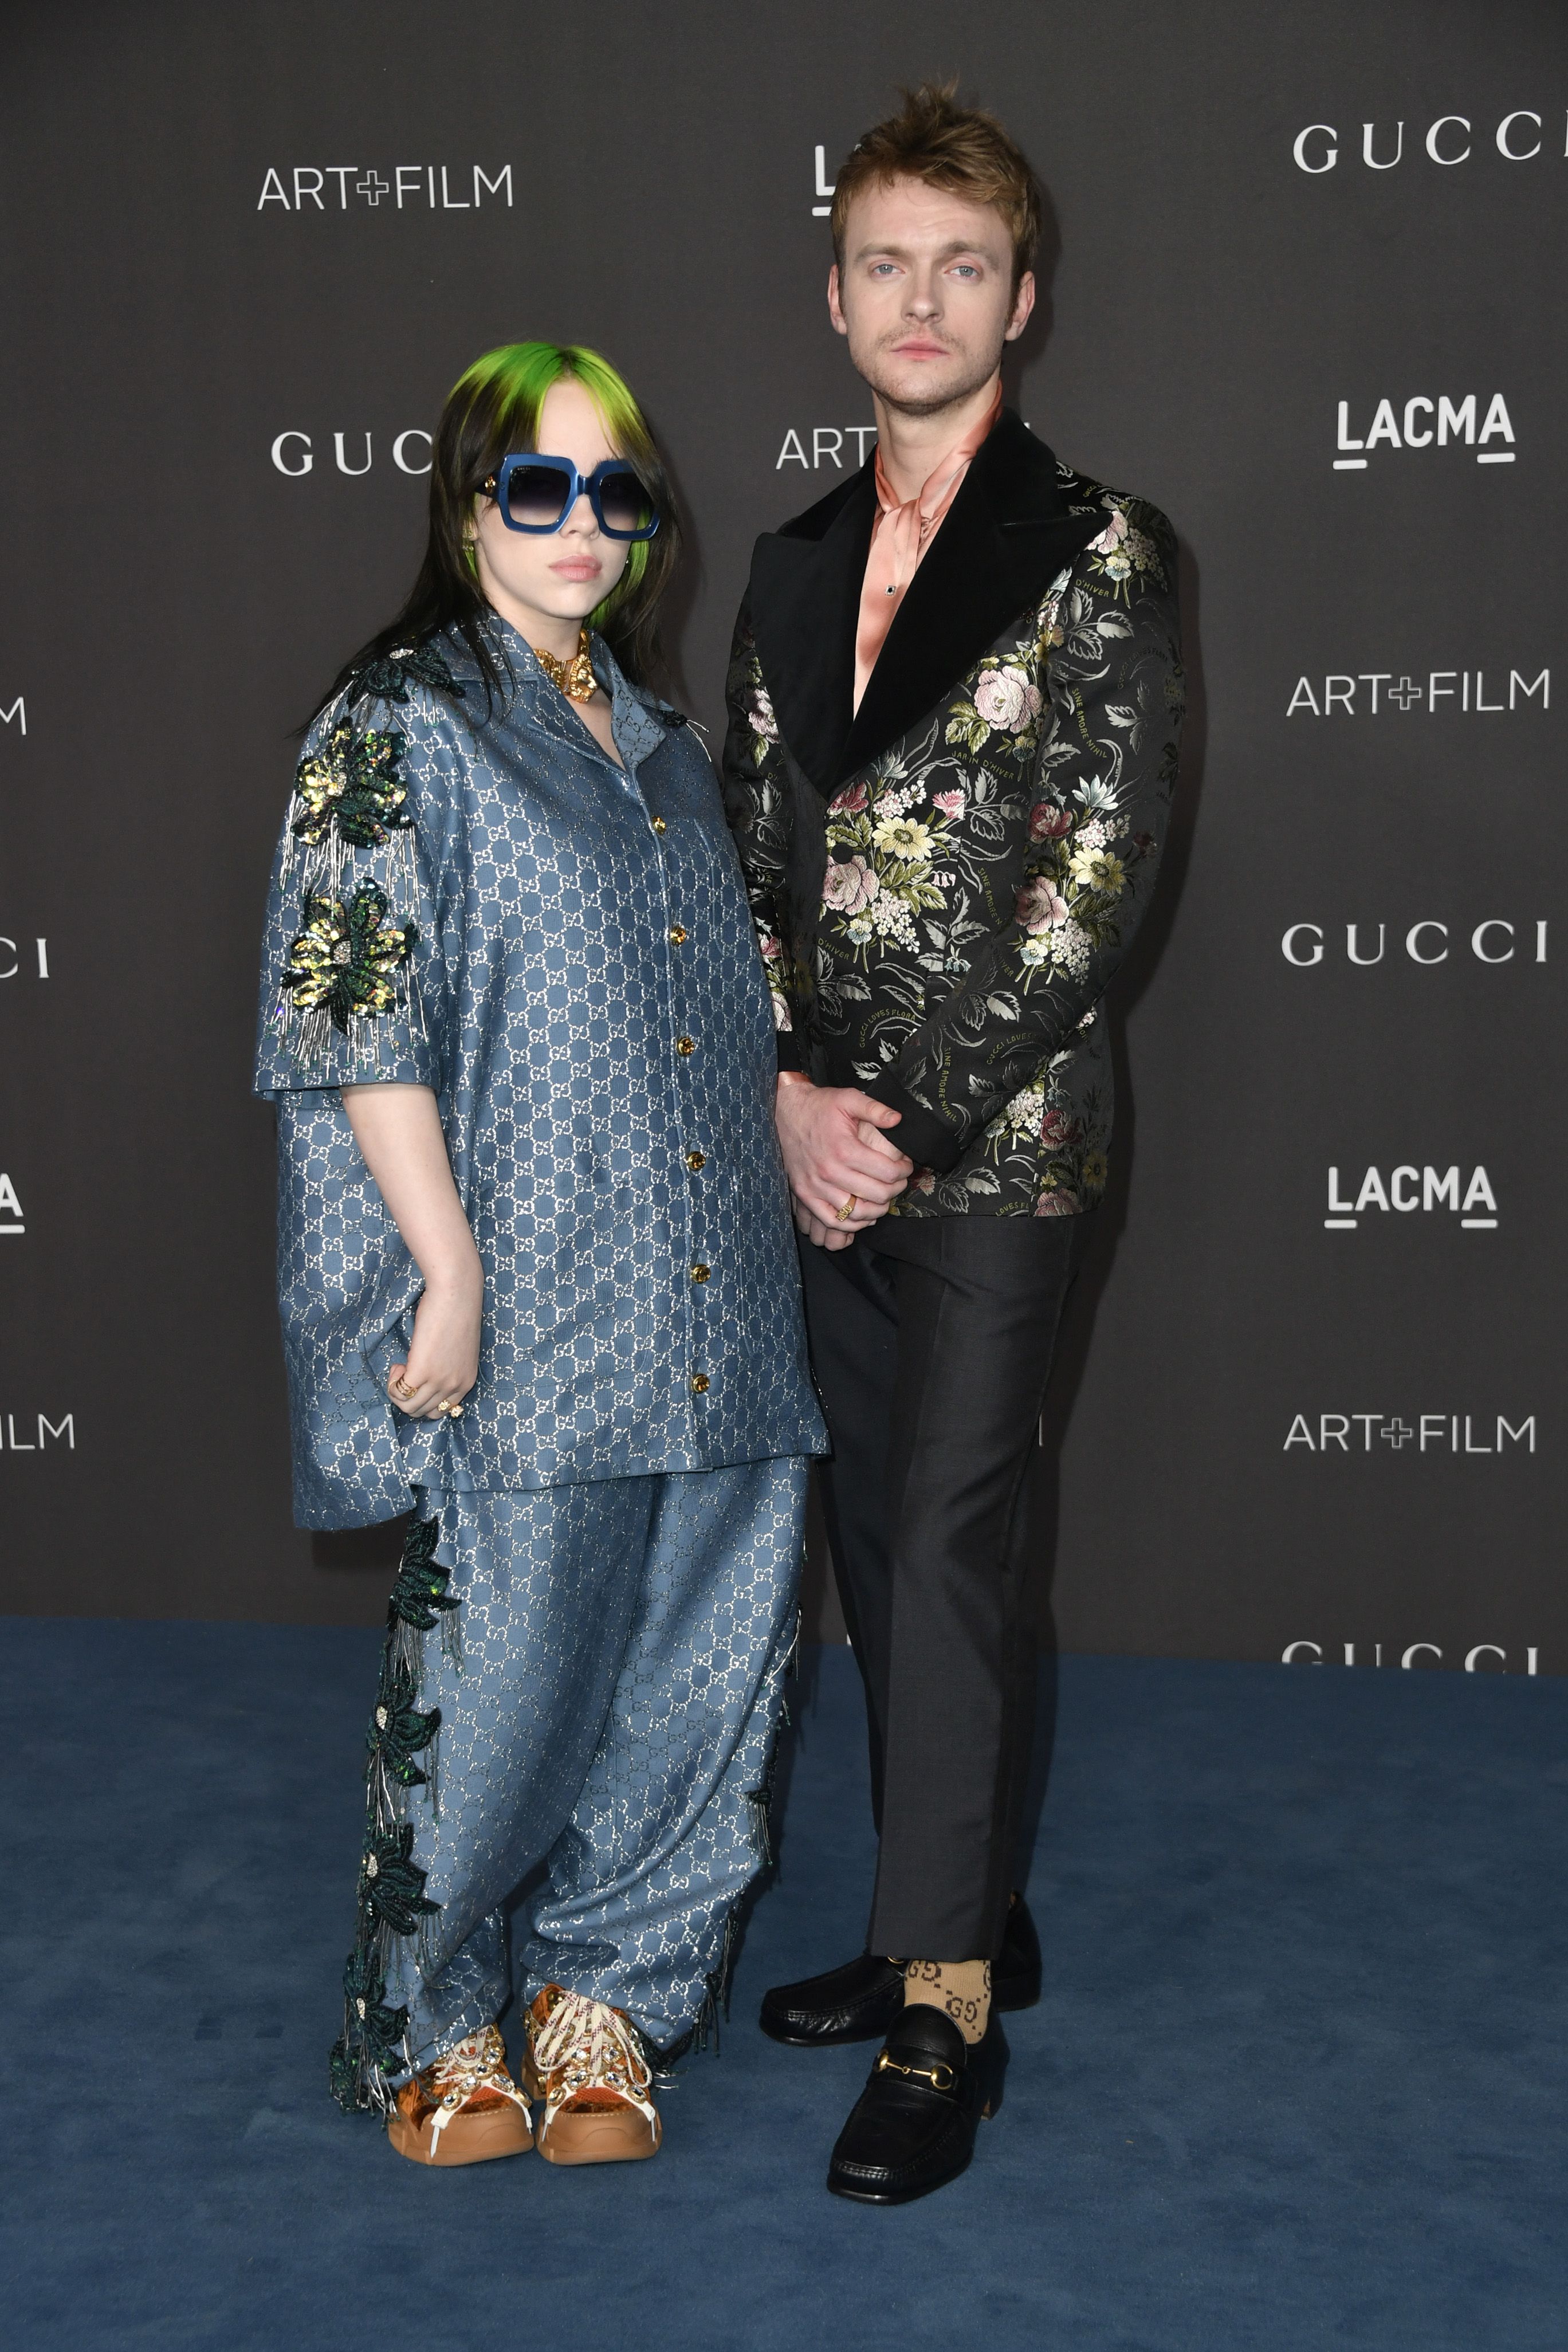 Who Is Billie Eilish's Brother Finneas O'Connell?